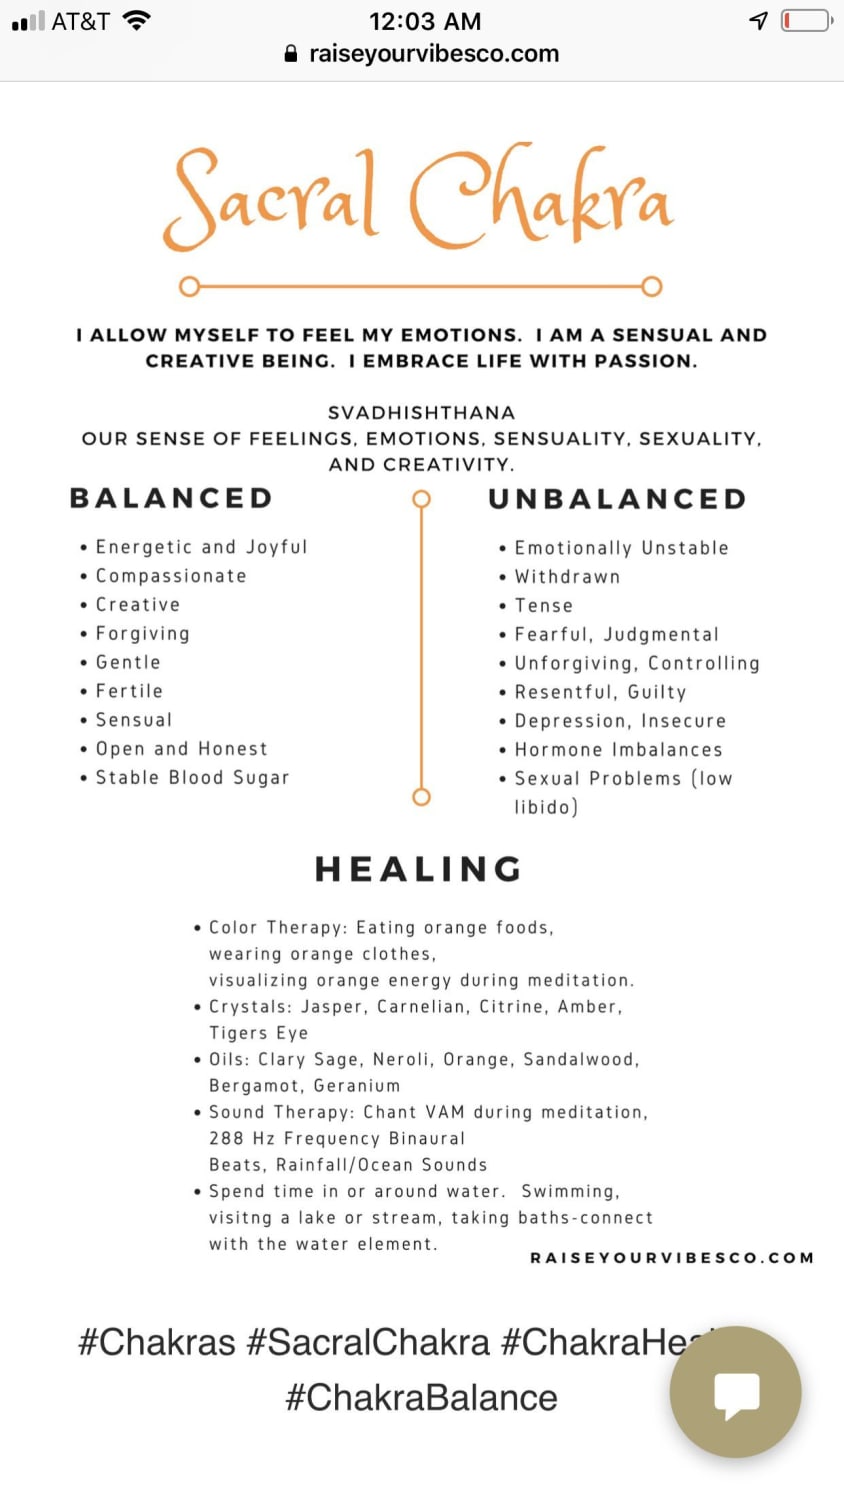 Sacral Chakra Healing, Affirmations, and Balance - Learn more about the sacral Chakra… | Sacral chakra healing, Chakra healing meditation, Reiki healing learning